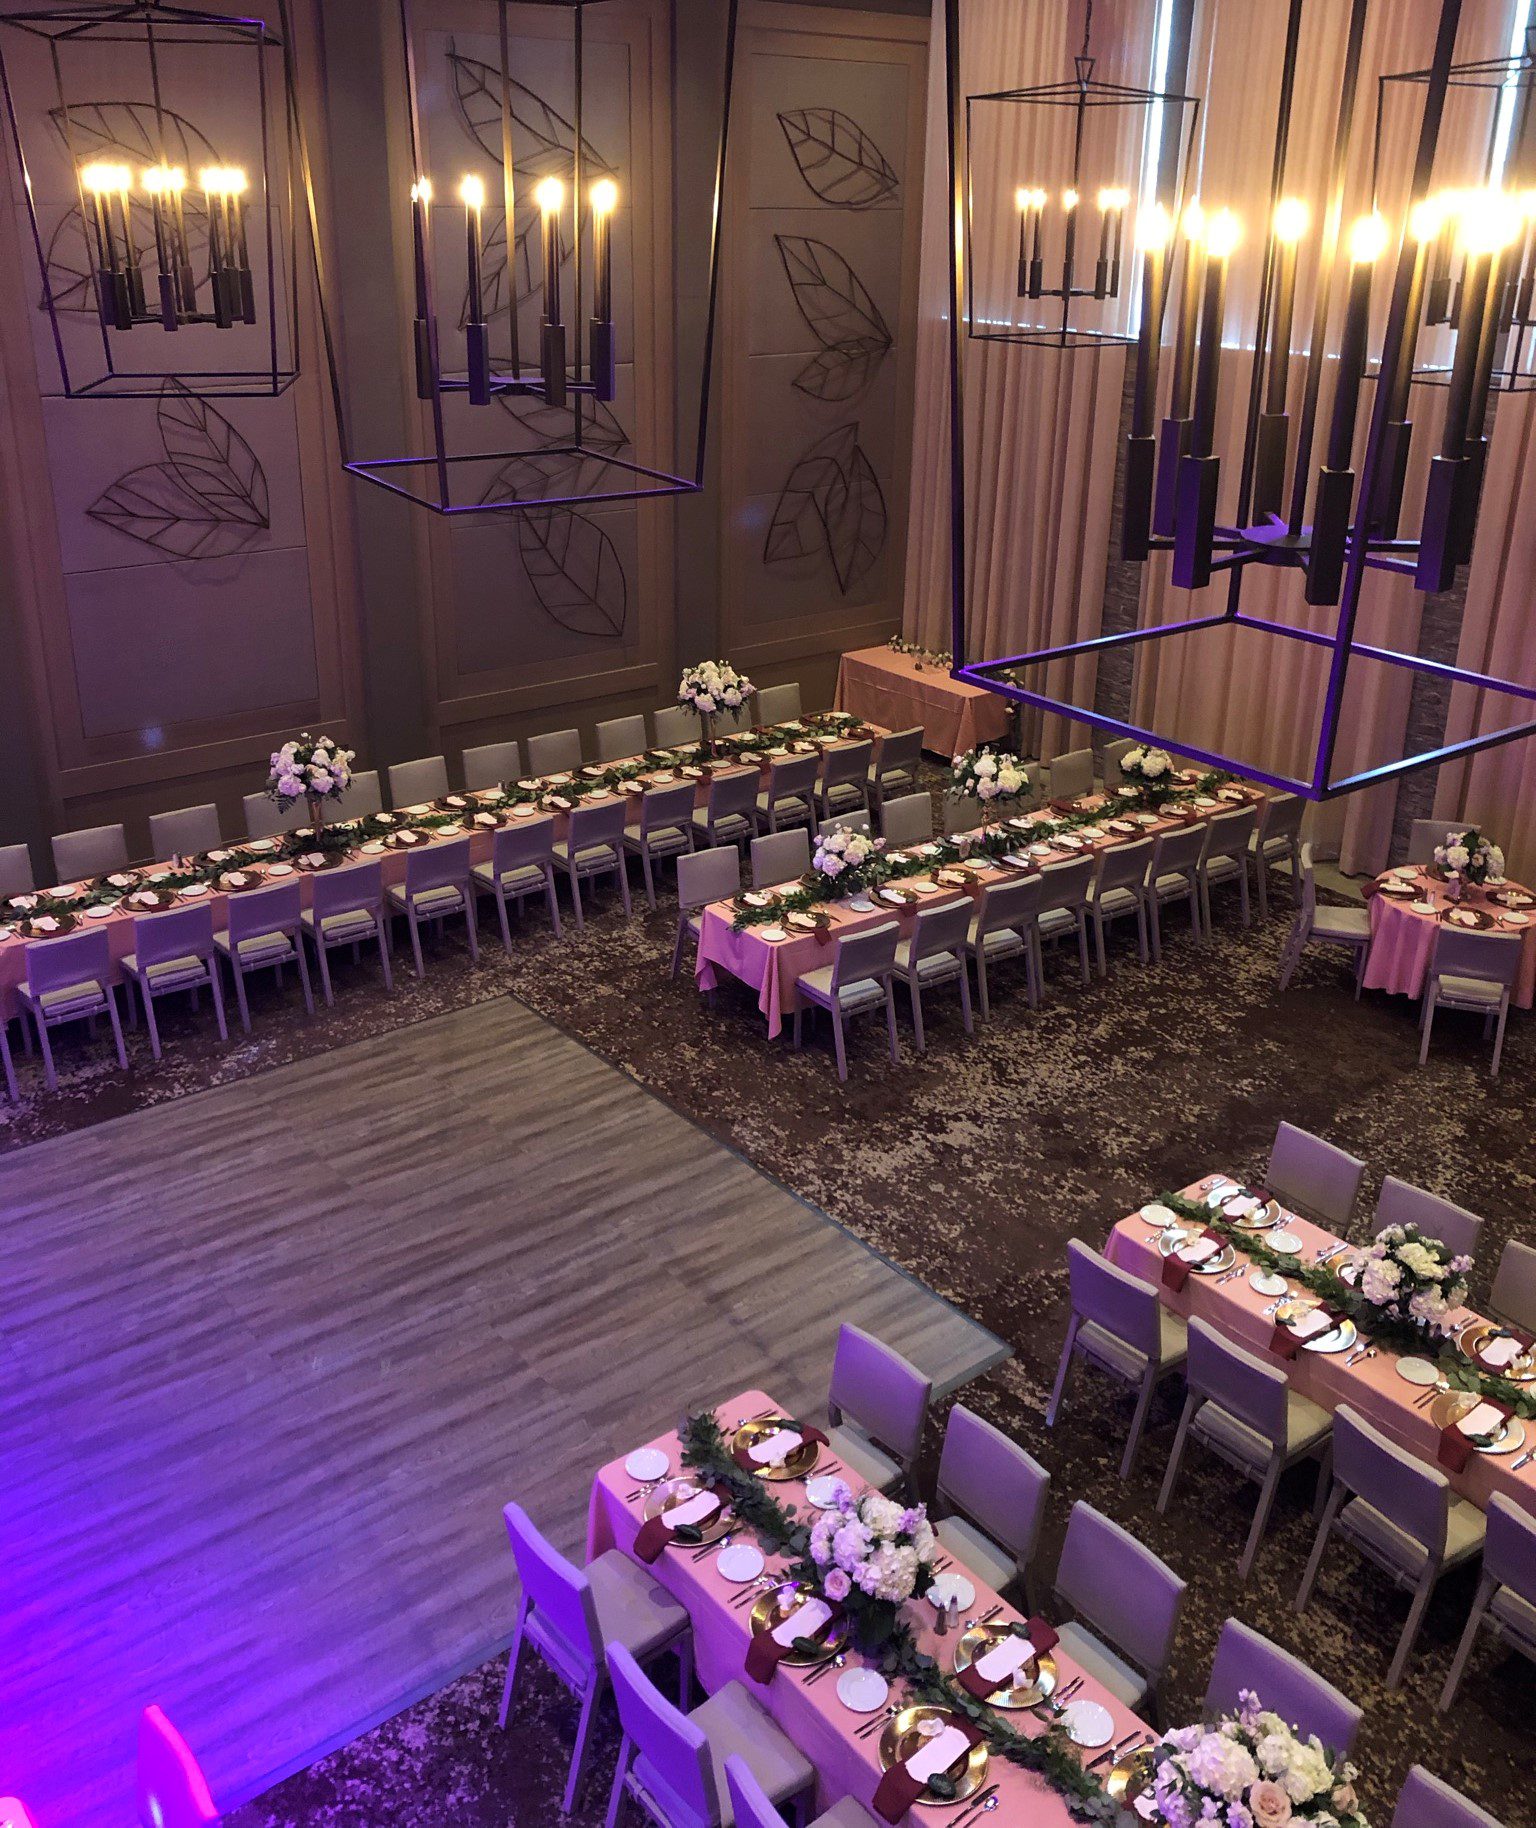 Large event space from above set for wedding